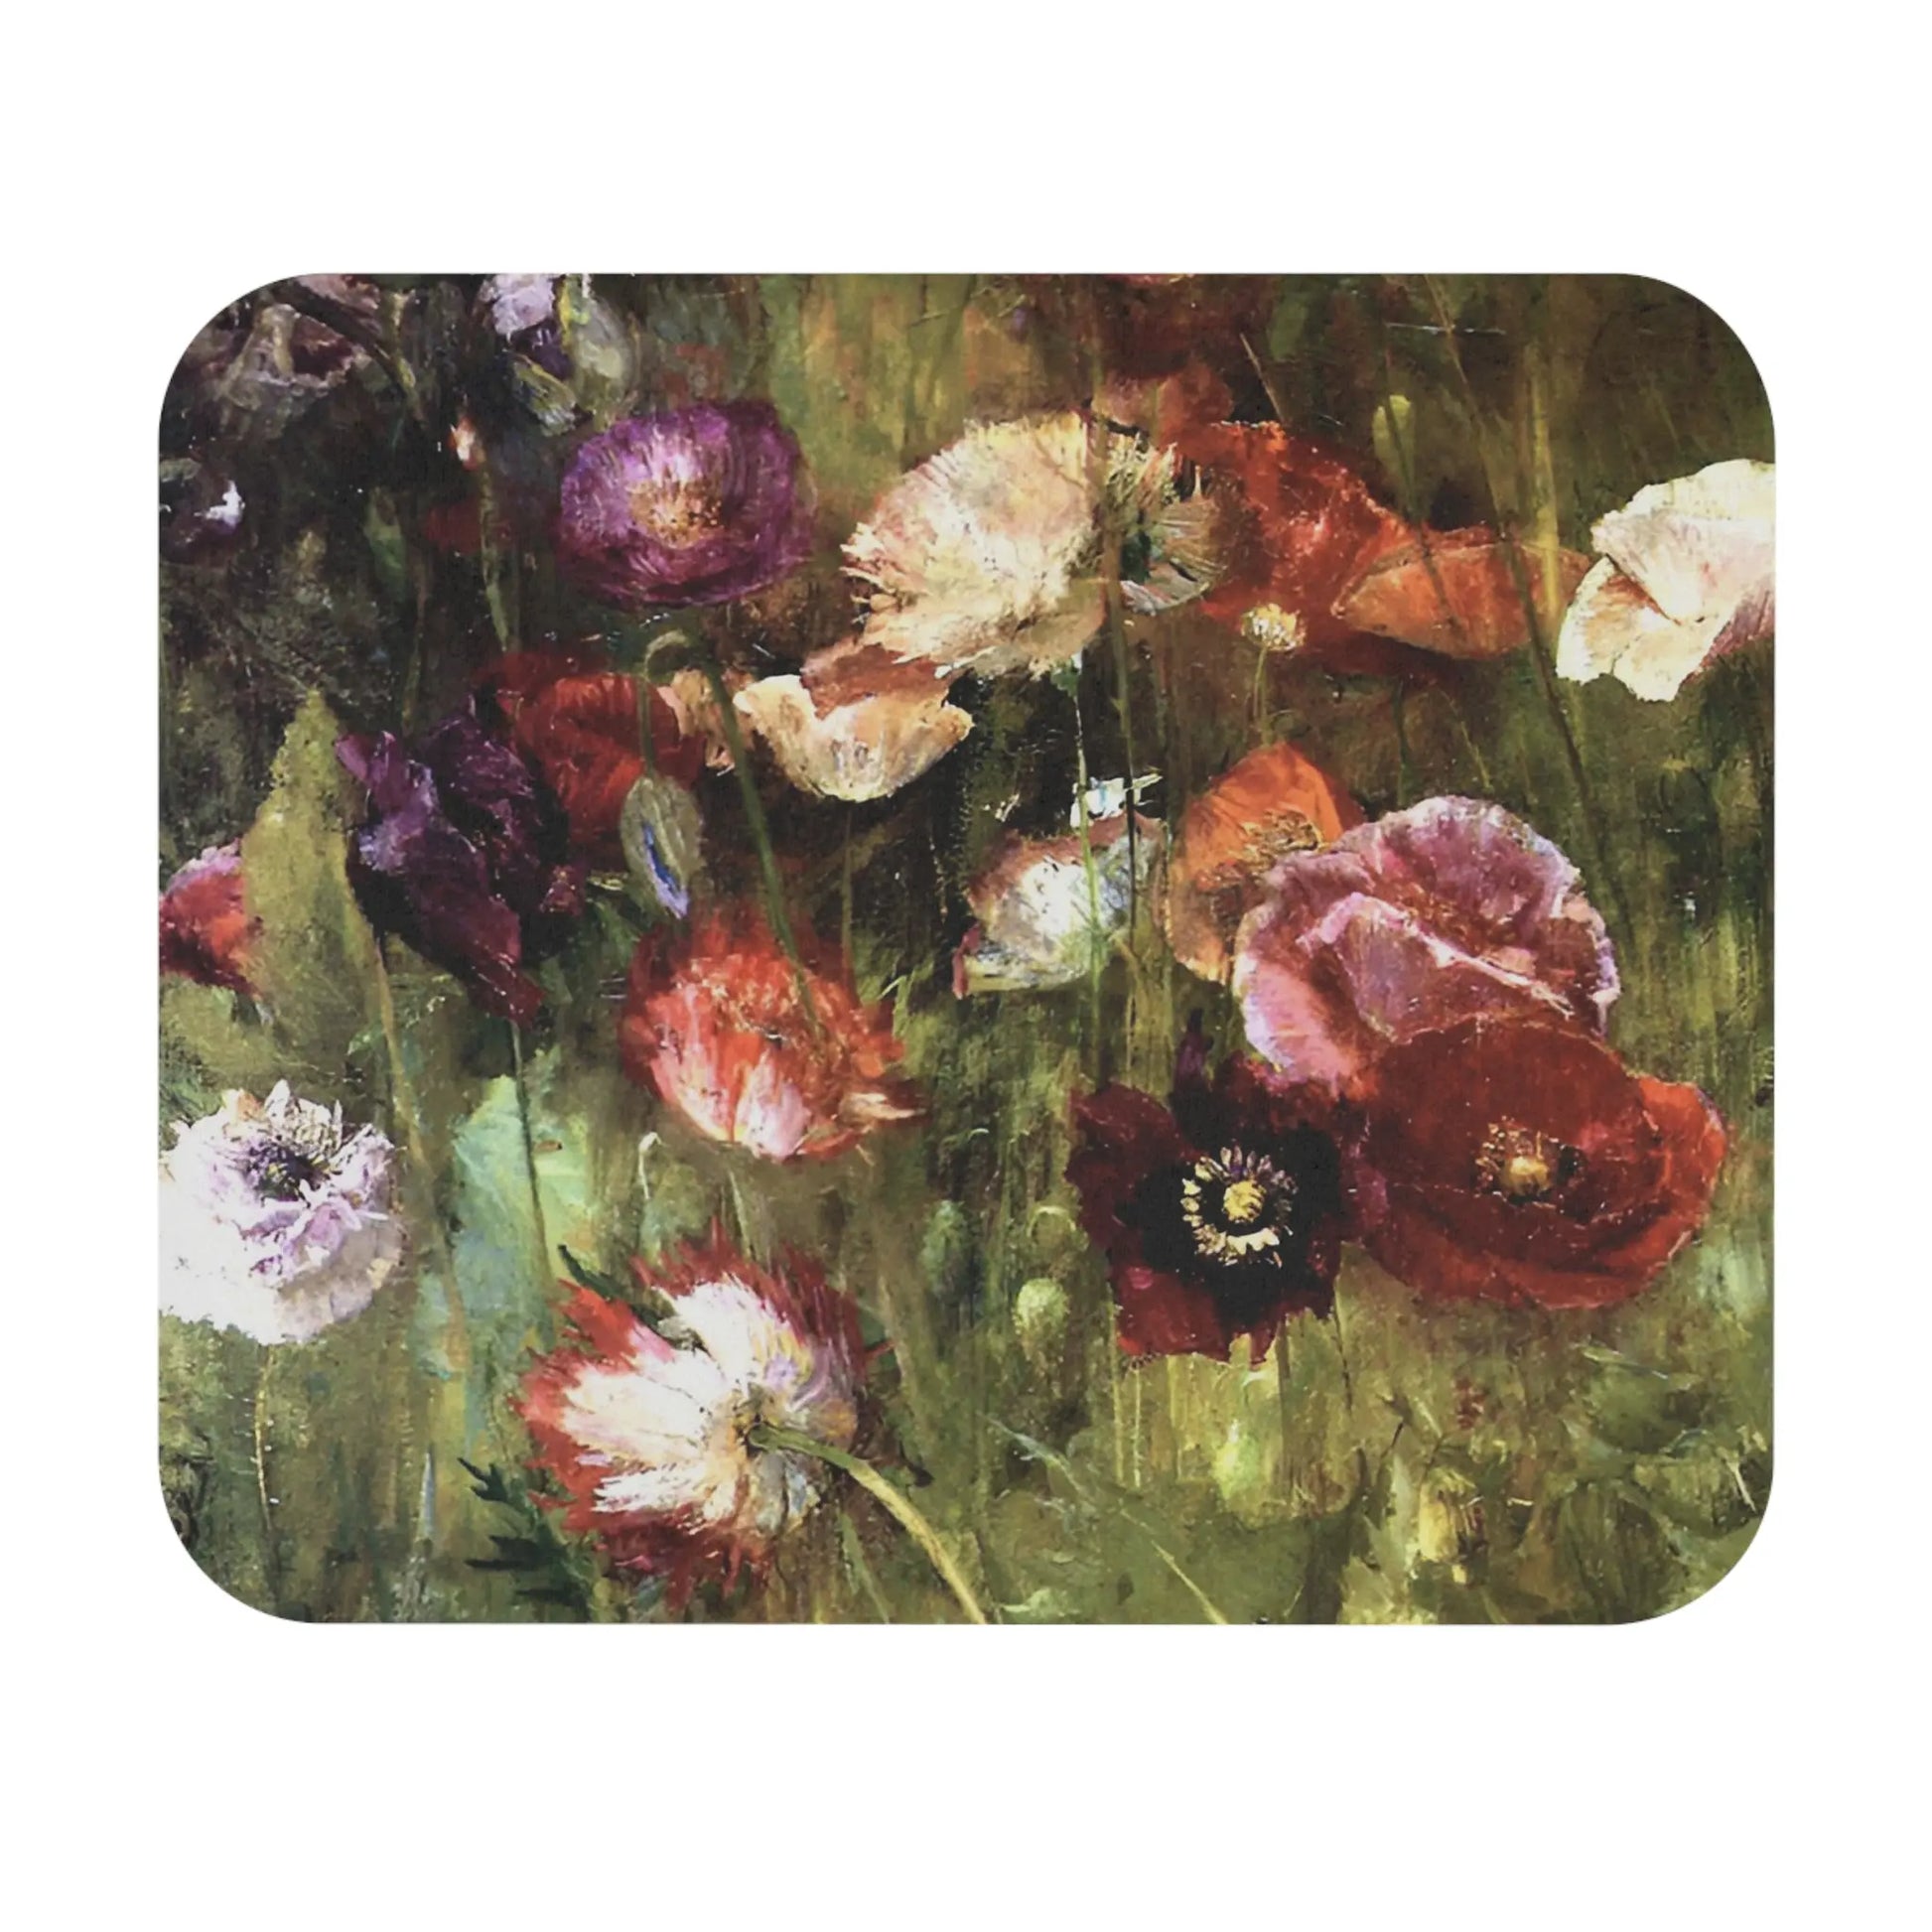 Abstract Flower Mouse Pad with impressionist art design, desk and office decor showcasing artistic flower paintings.